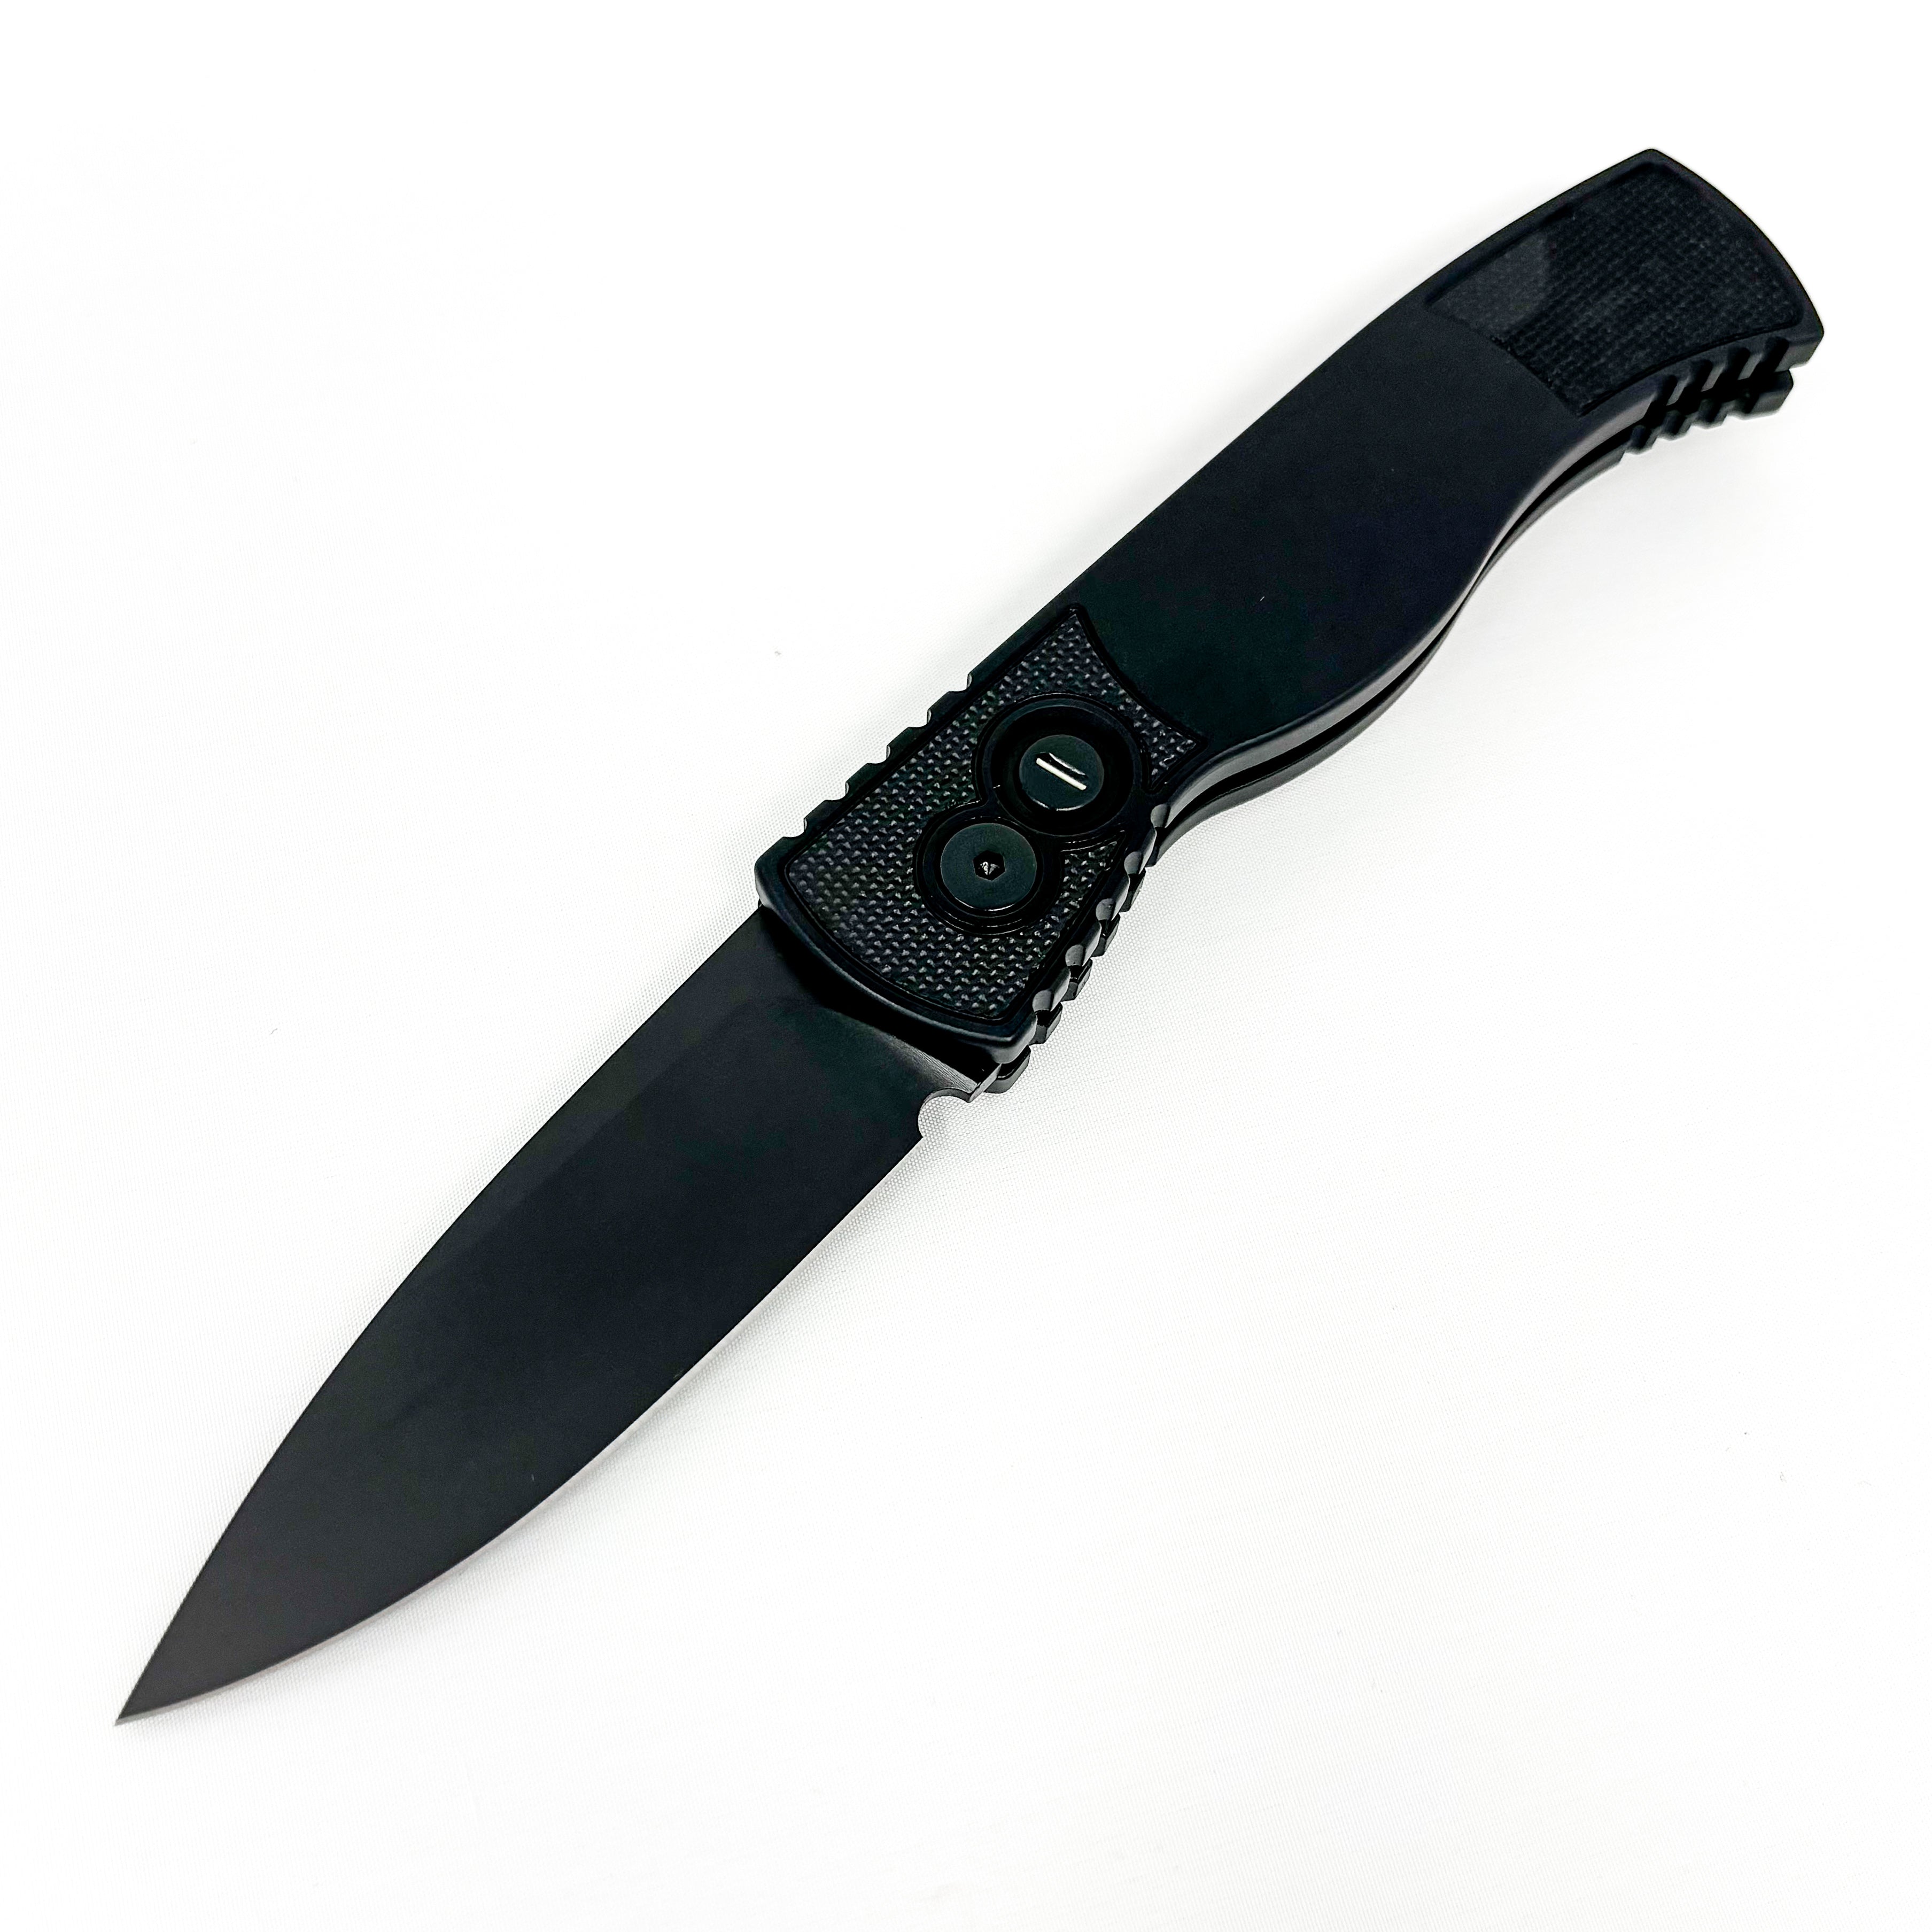 Pro-Tech Knives Tactical Response 2 - Operator Edition - Black Handle & Blade - T203-Operator